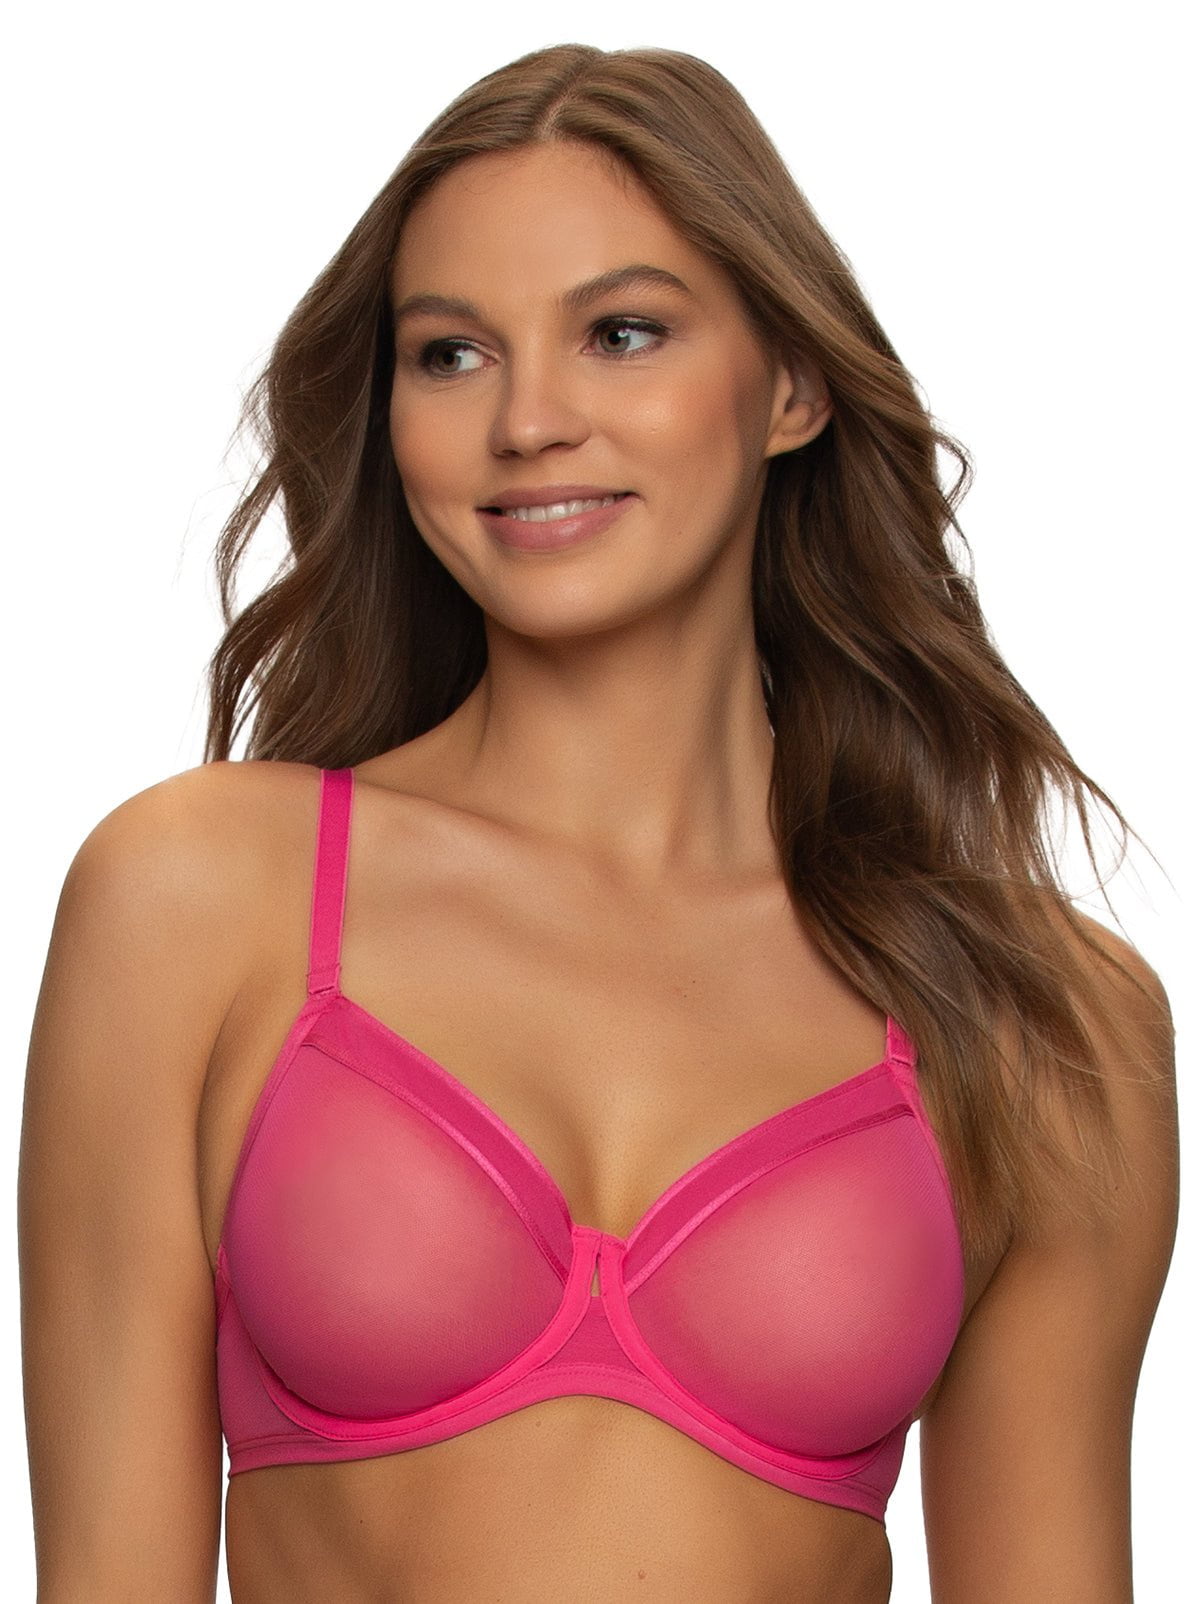 Paramour Women's Plus Size Lotus Embroidered Unlined Bra - Rose